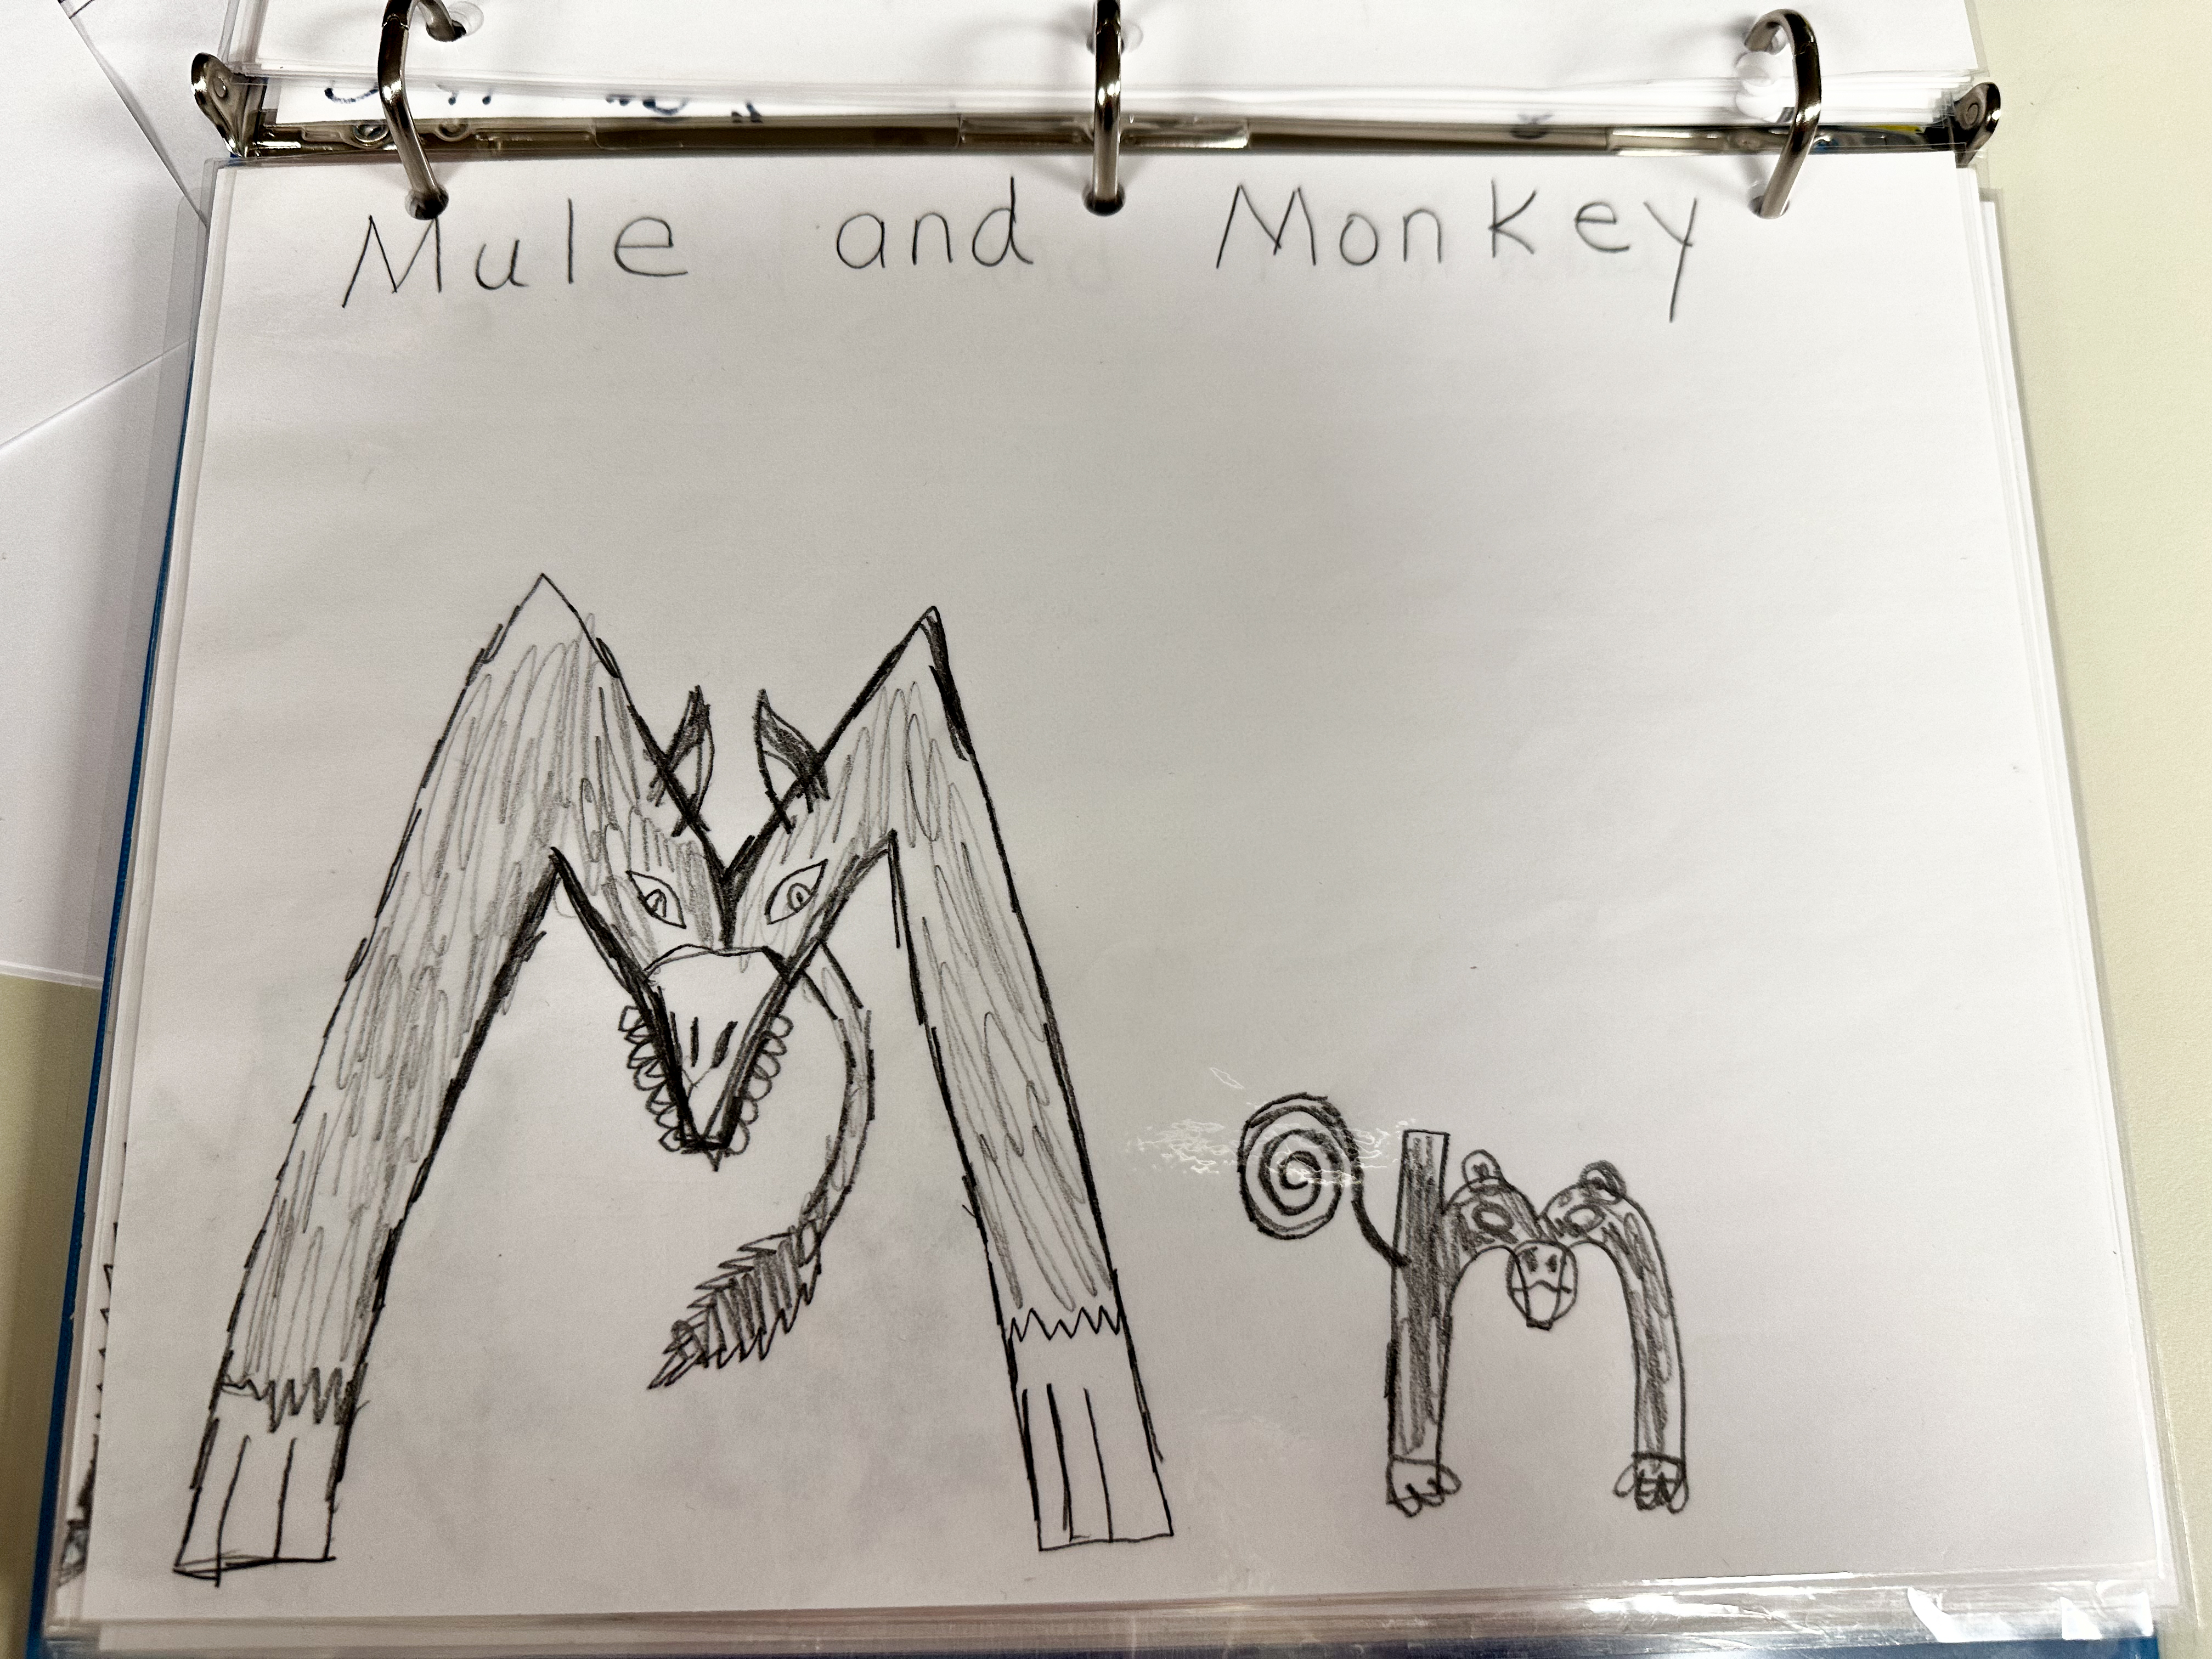 Robert Woody's illustration of Mule and Monkey